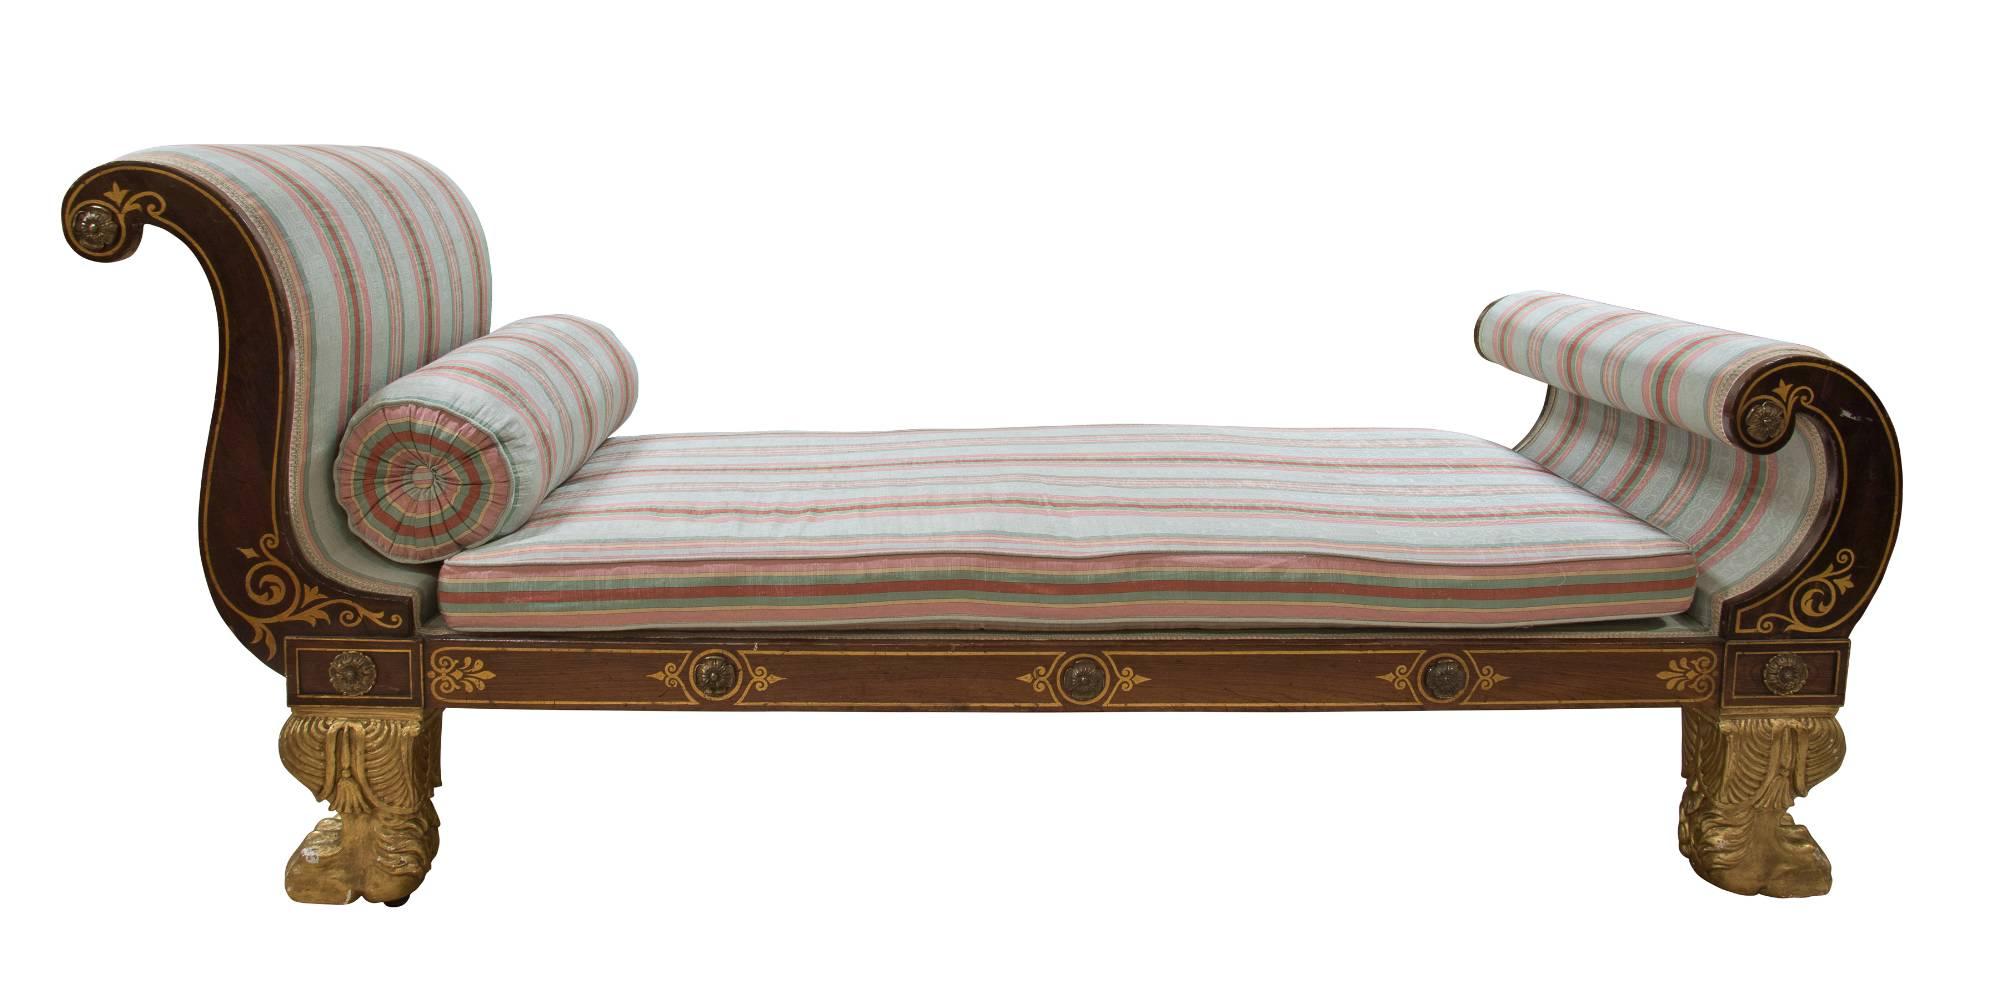 A Regency faux rosewood and ormolu-mounted, brass inlaid chaise lounge with gilded paw feet,


circa 1805.
 